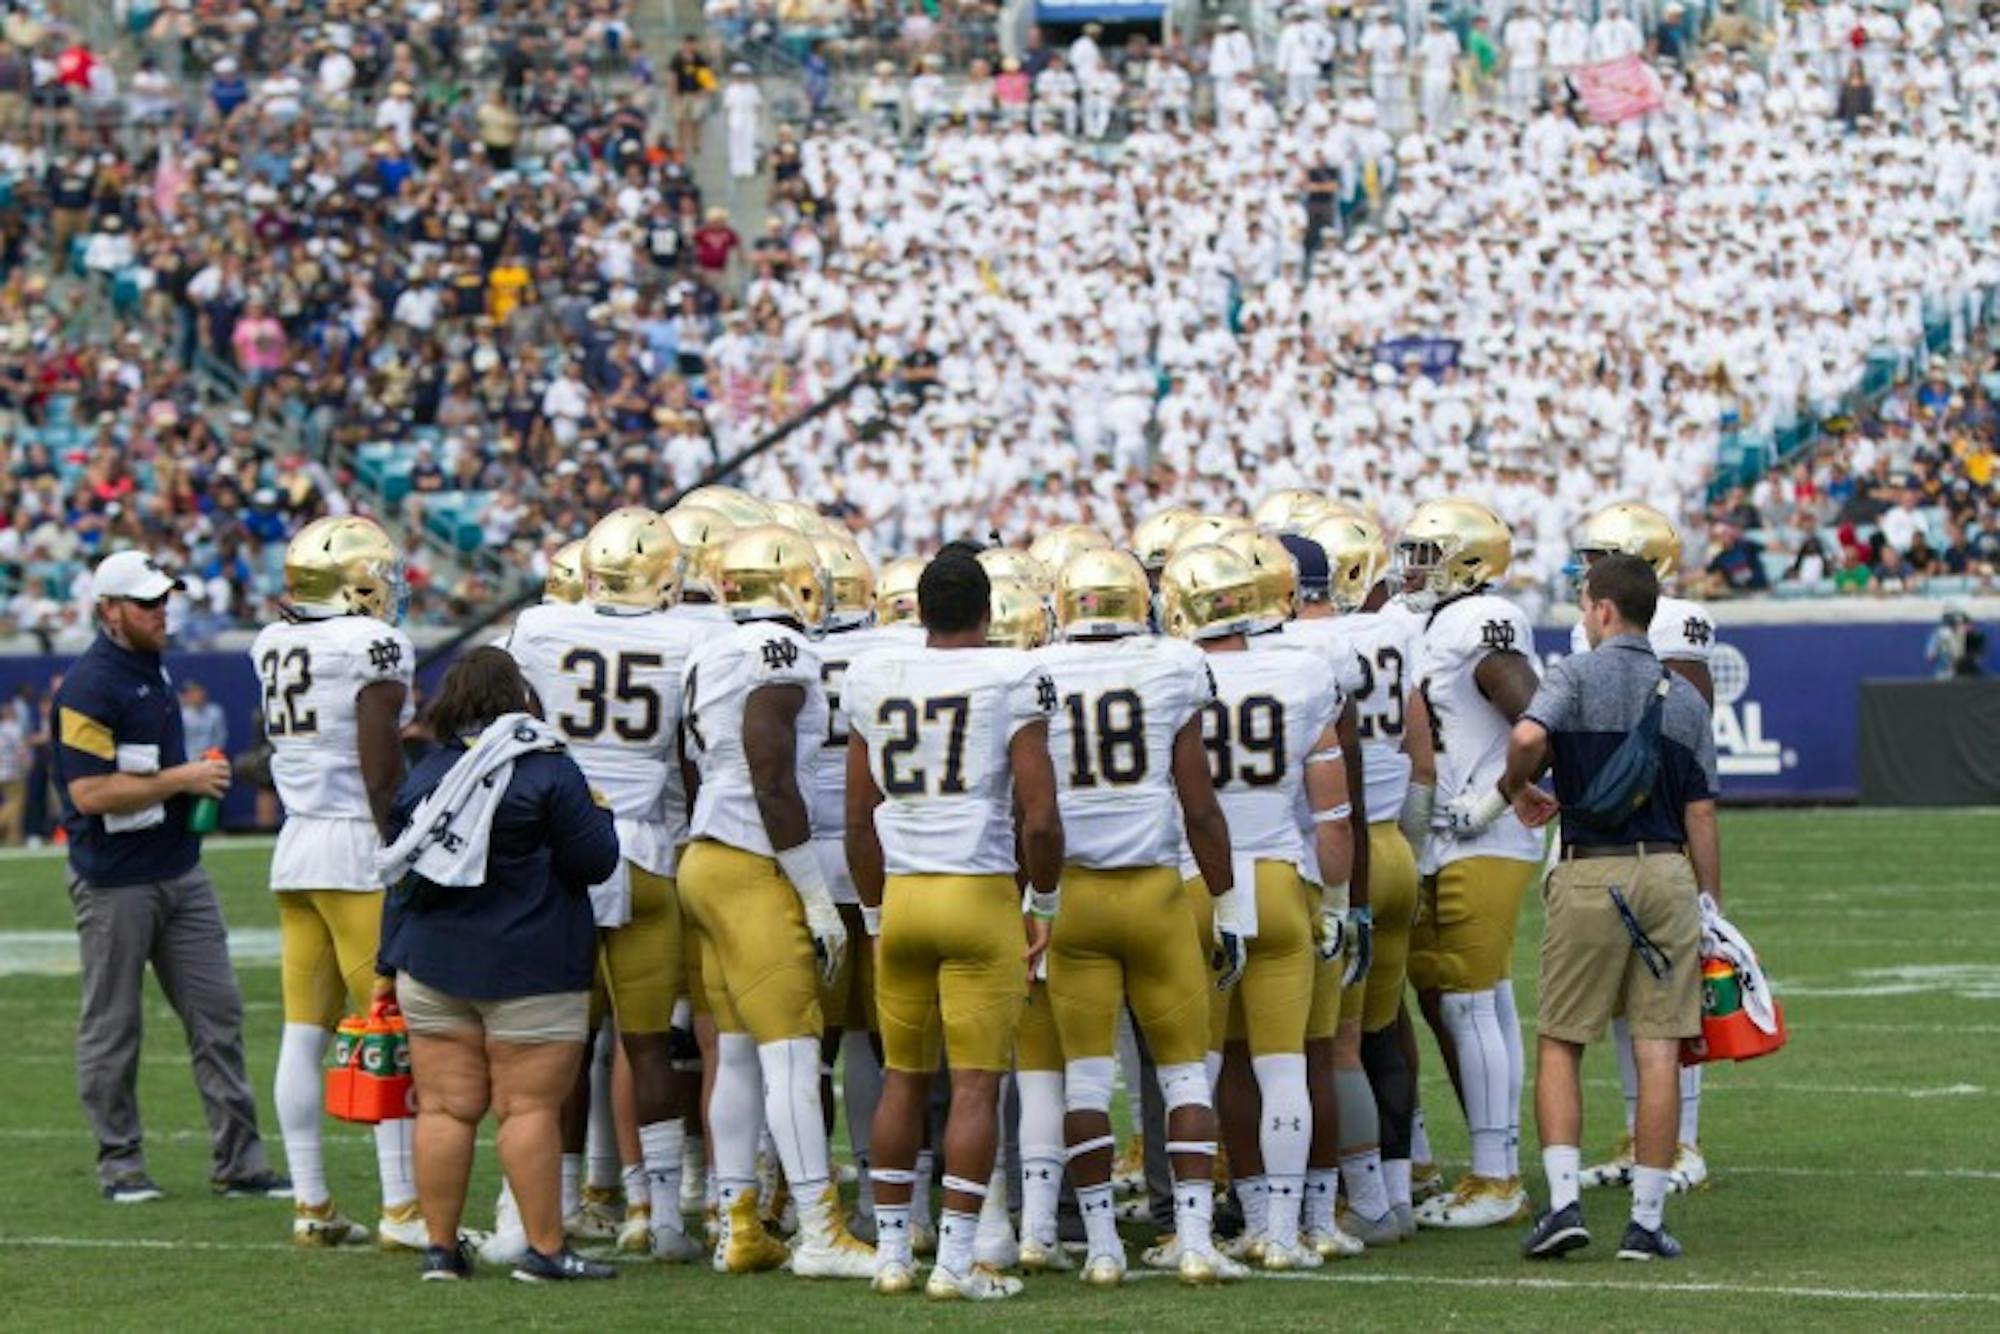 Notre Dame meets in a huddle during 4th quarter. The midshipmen stand cheering in their formal uniforms in the background.